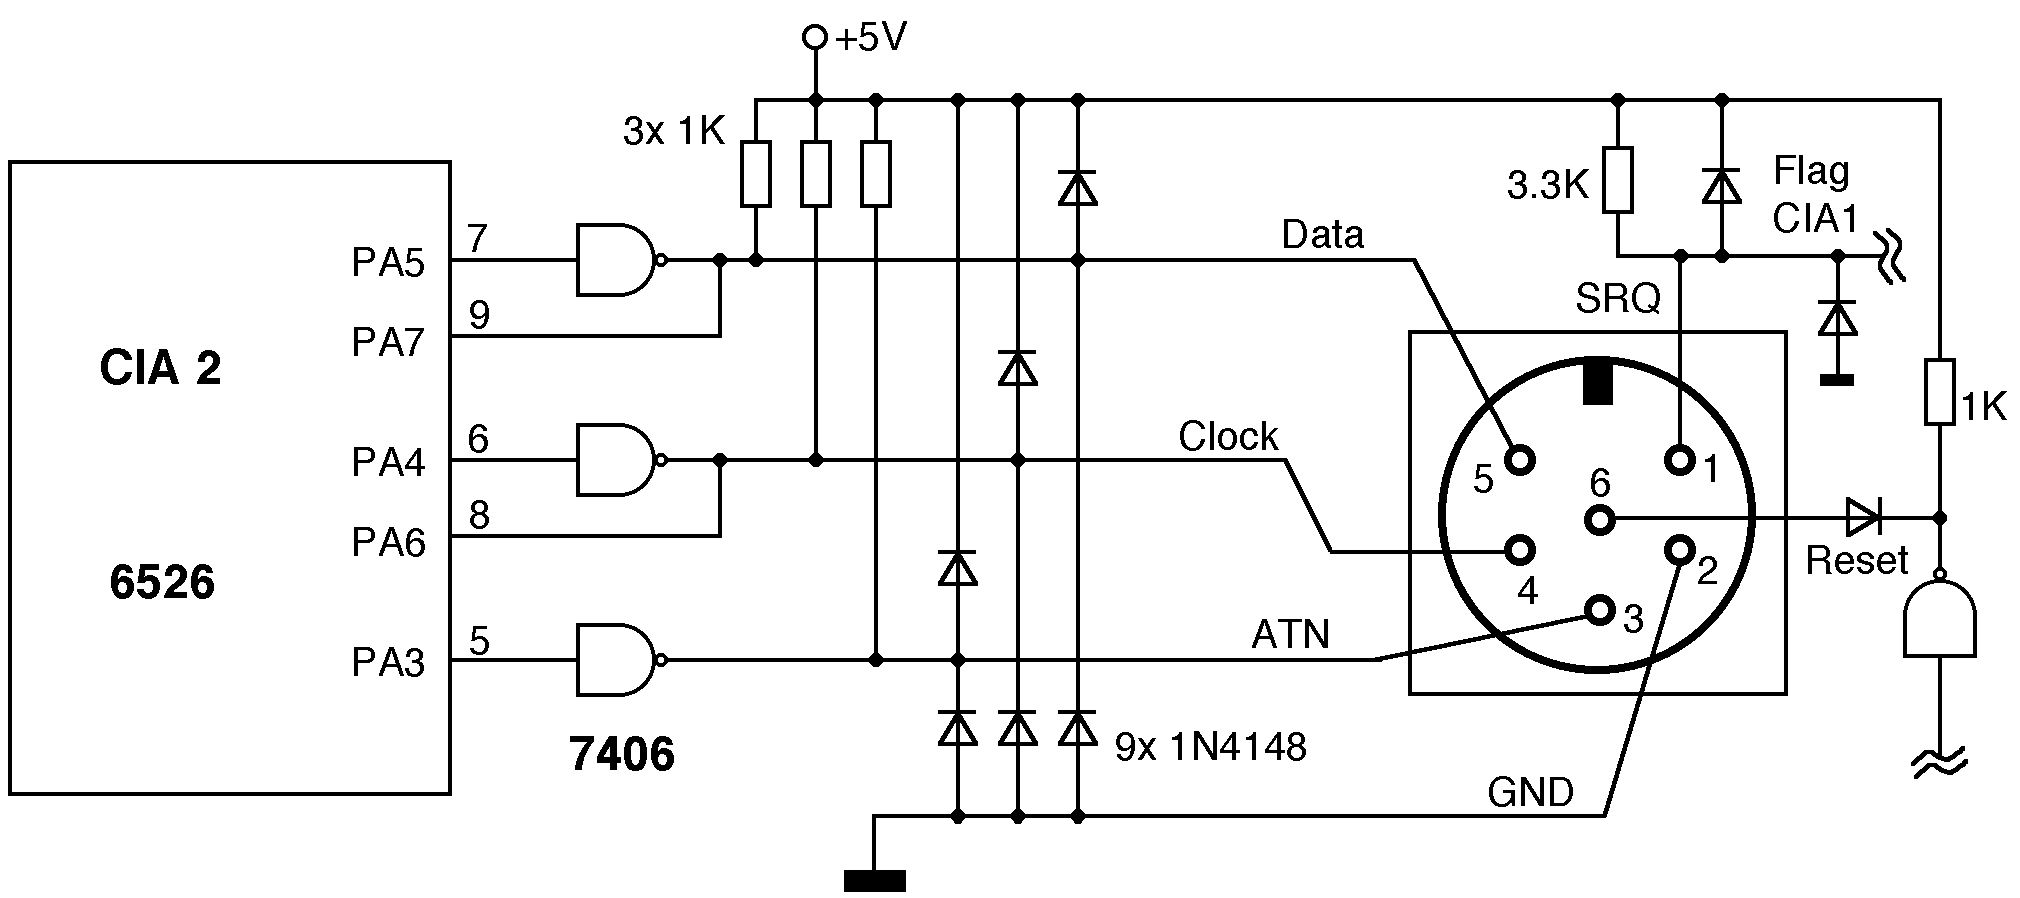 [serial jack - protection circuit (9 diodes)- 7406 - CIA]